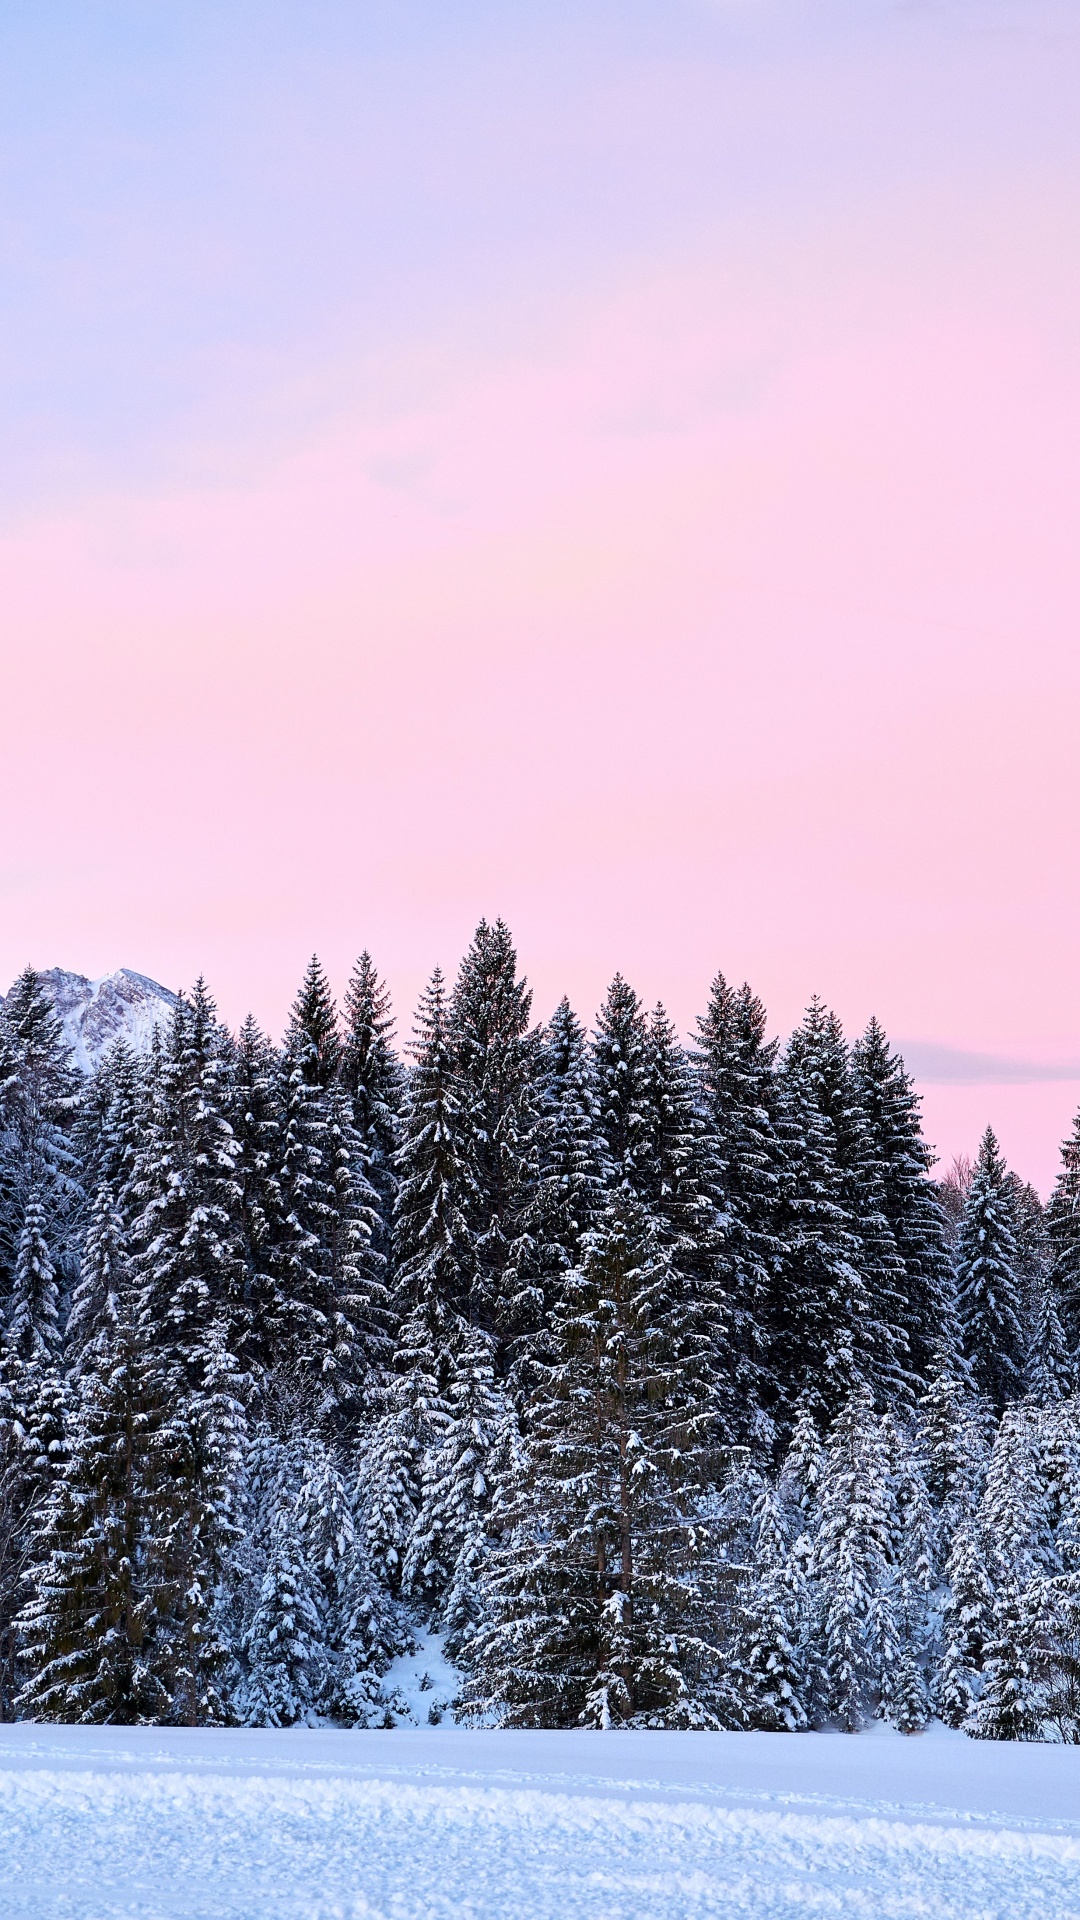 Minimal snowy Winter wallpaper pack for iPhone